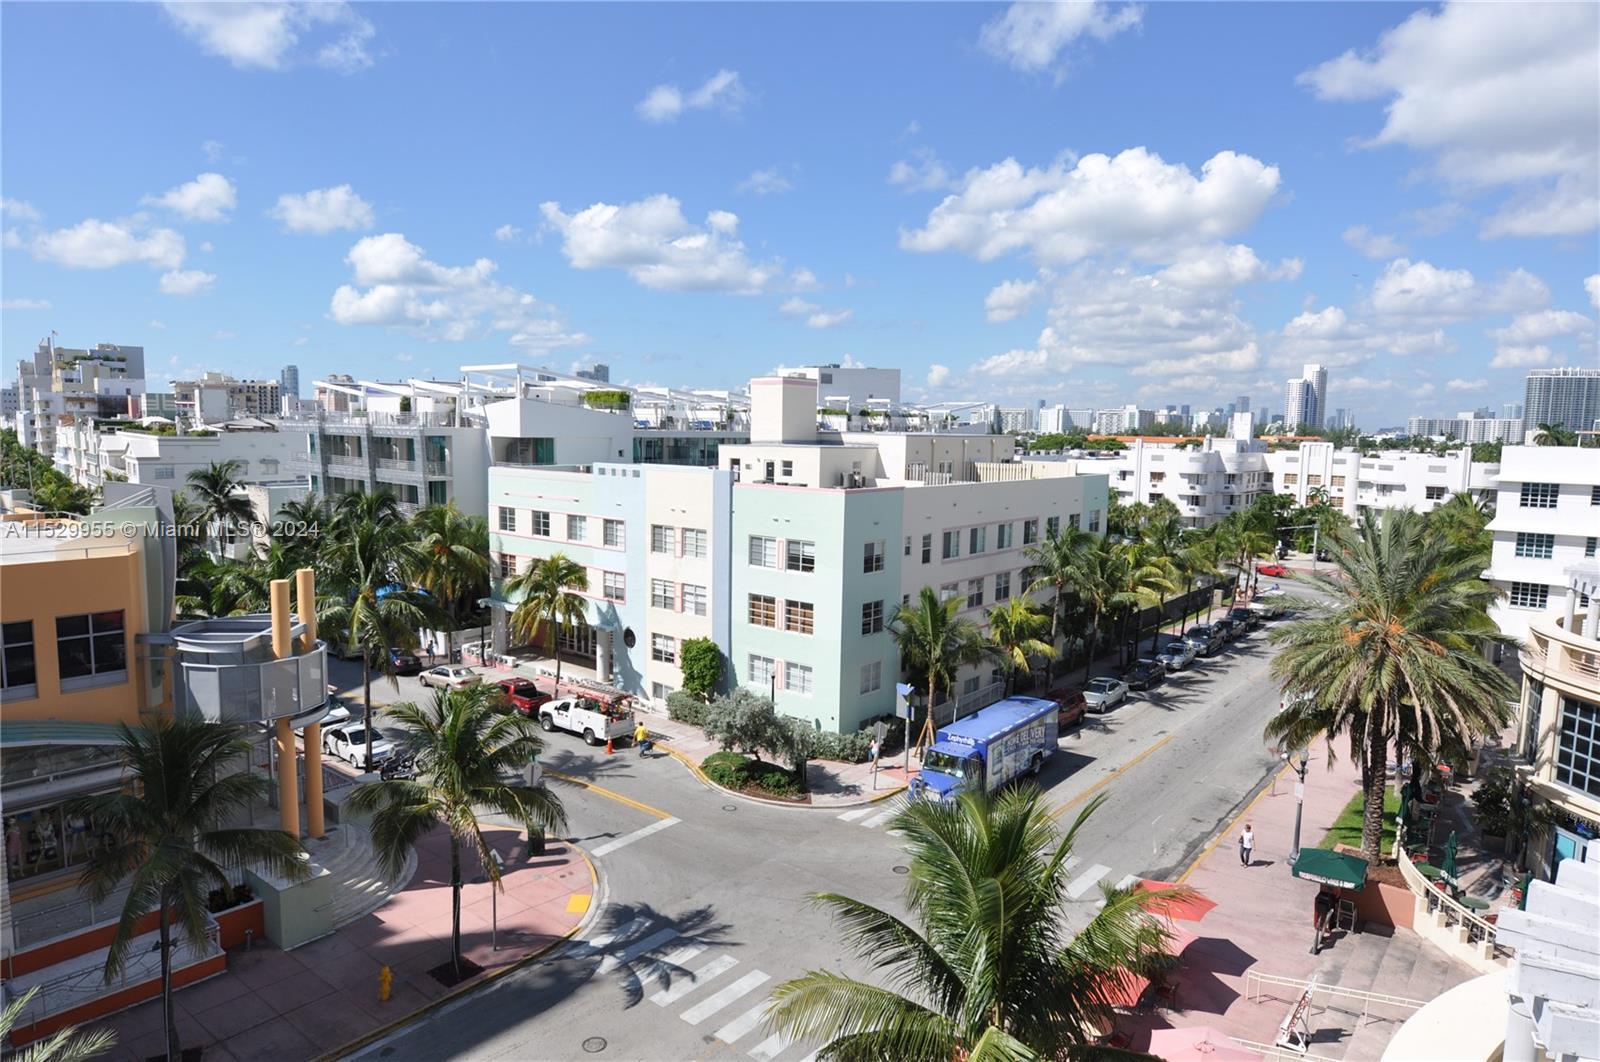 Live the Art Deco Lifestyle on World-Famous Ocean Drive! This unique 2-story townhome is in a fantas